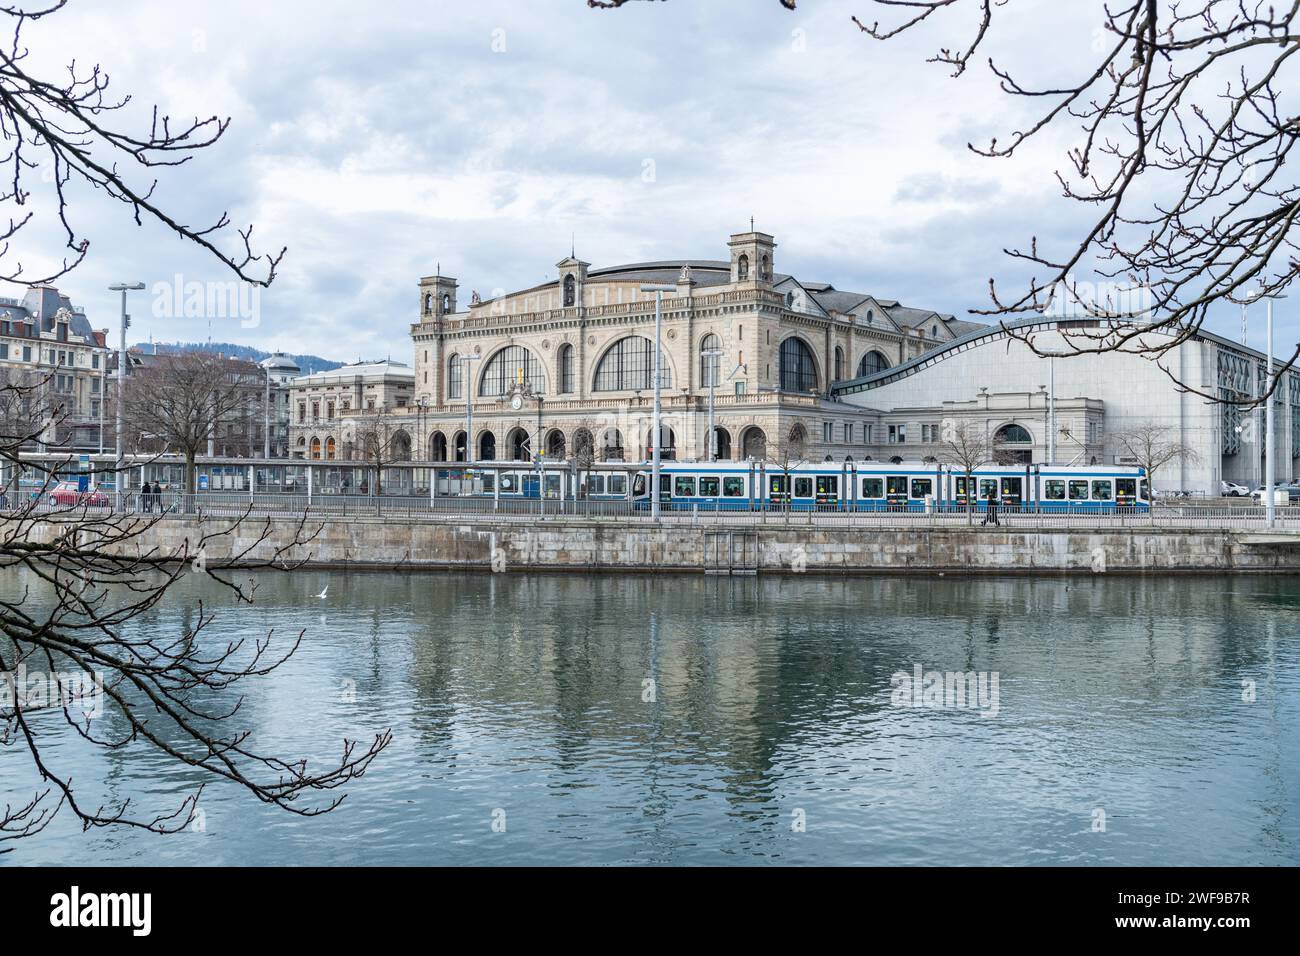 A view of the outside exterior of the Zurich Hauptbahnhof train station in Zurich, Switzerland Stock Photo